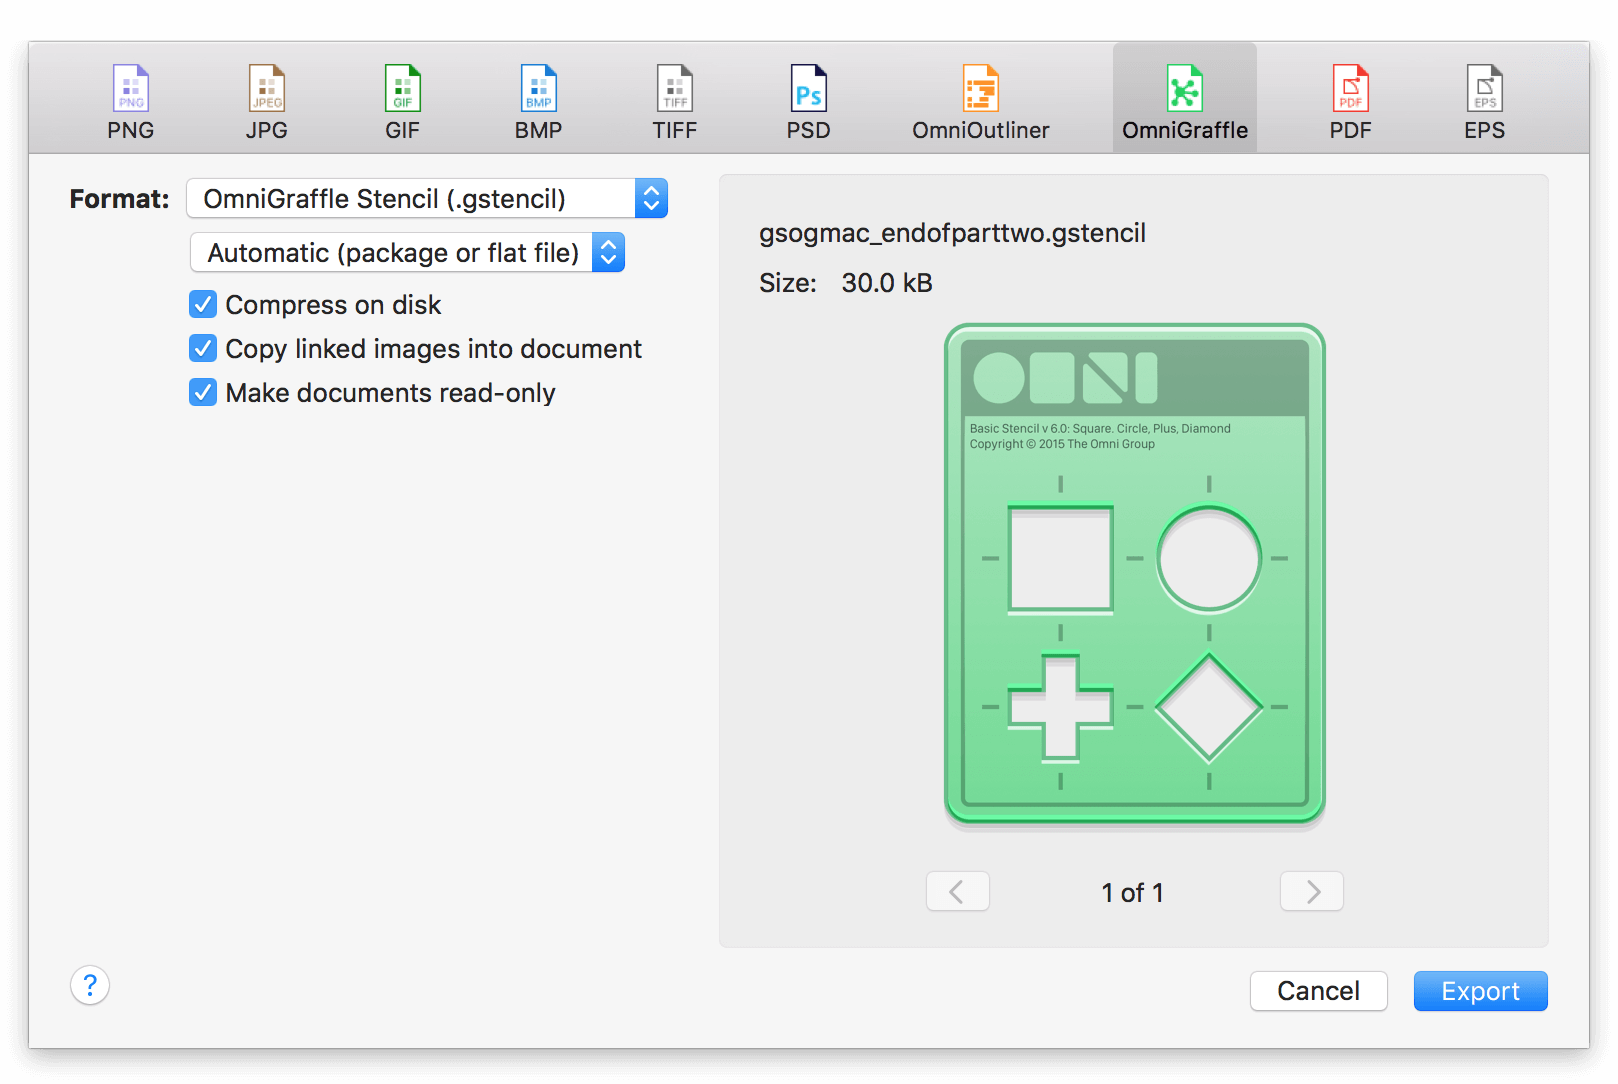 Exporting as an OmniGraffle Stencil file